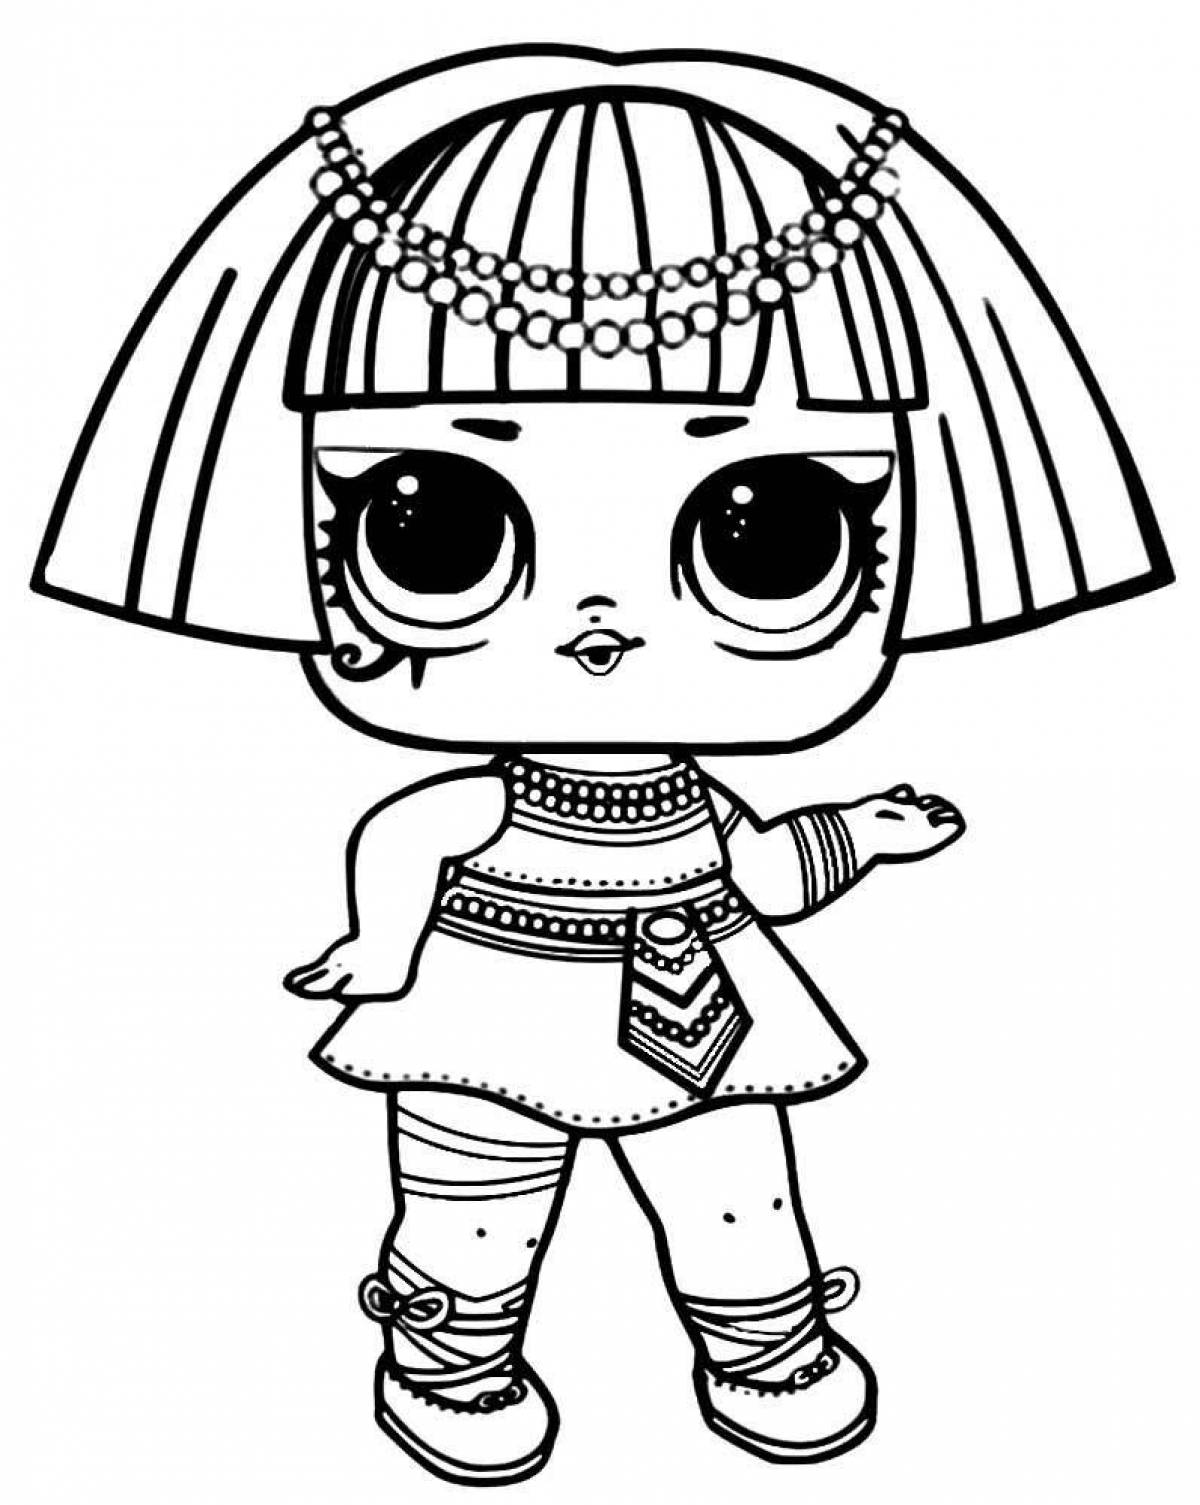 Calming doll coloring page